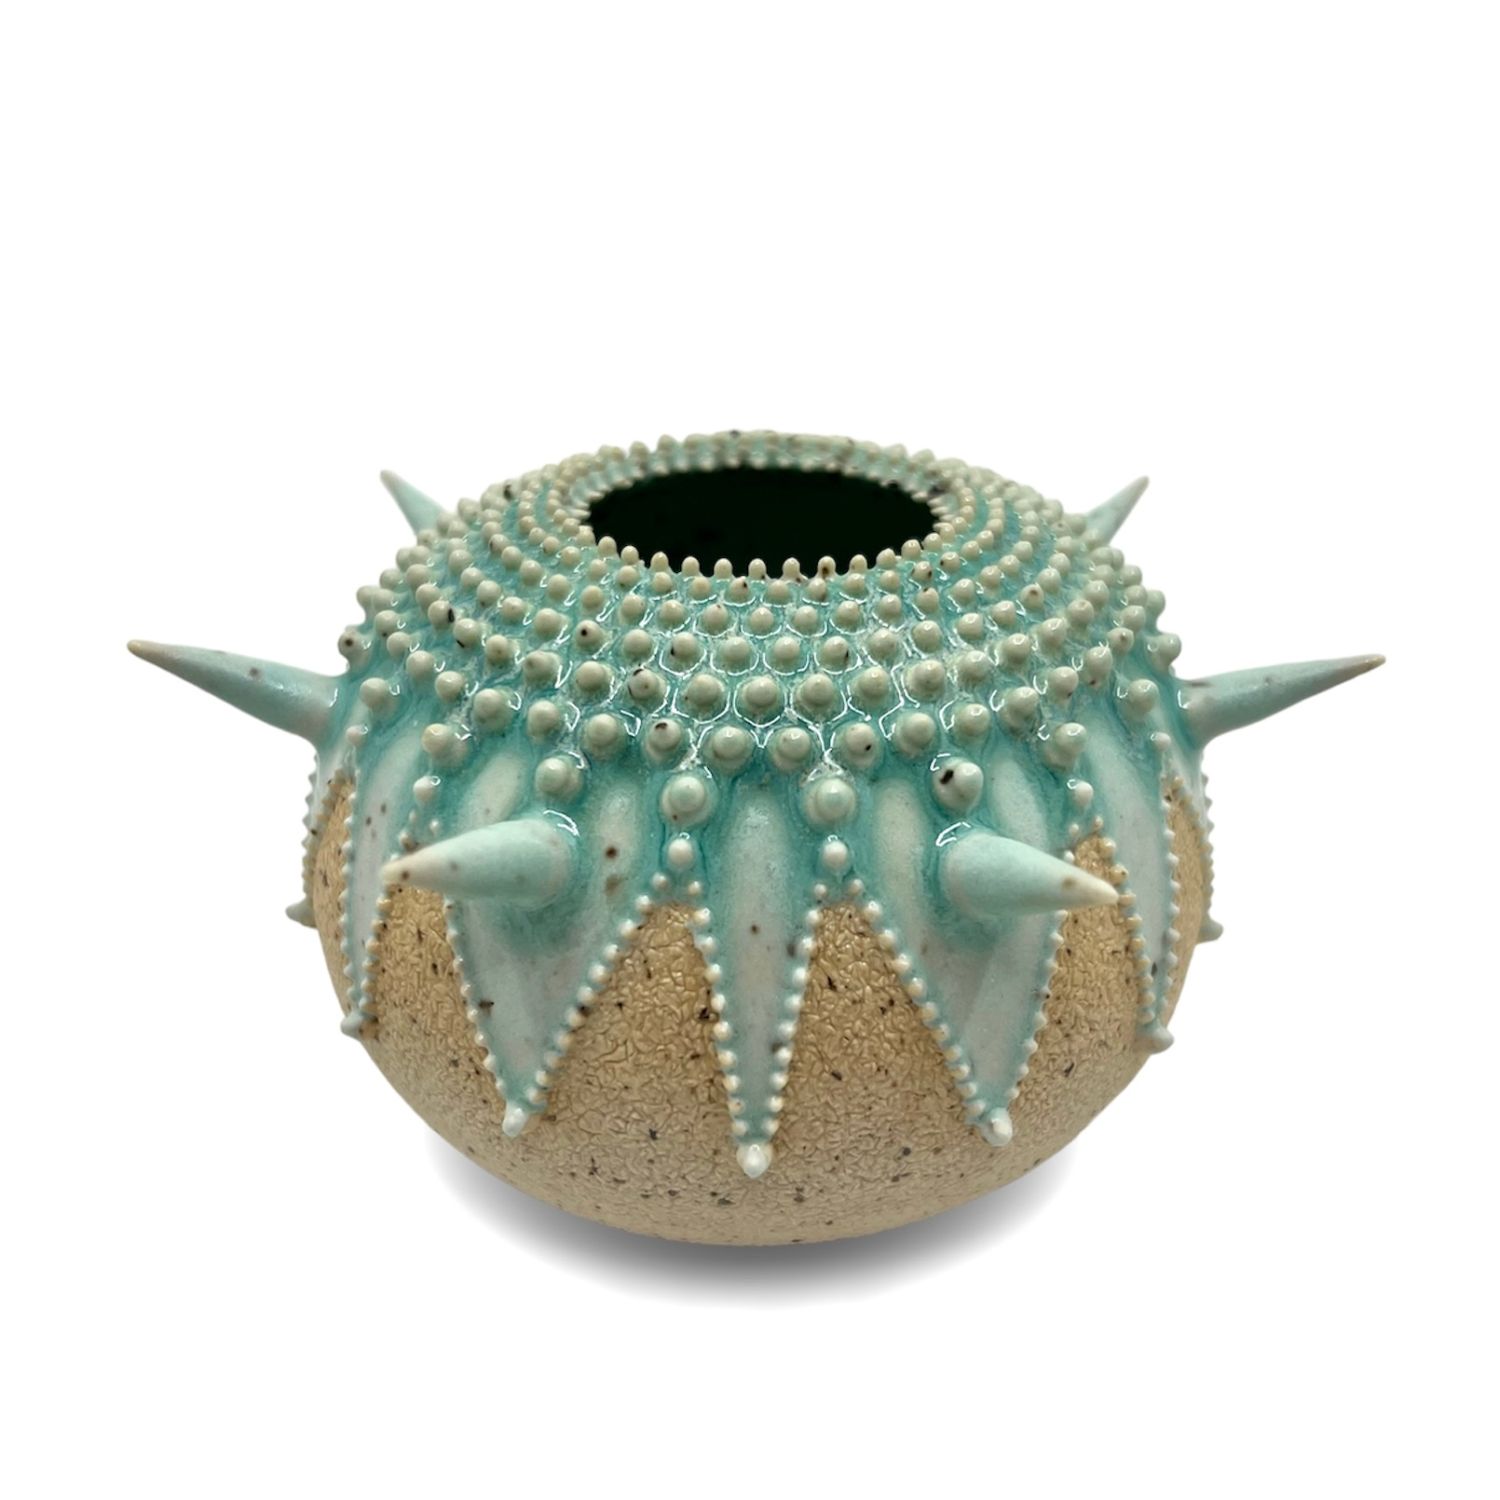 Zara Gardner: Turquoise Sculpture with Spikes Product Image 5 of 6